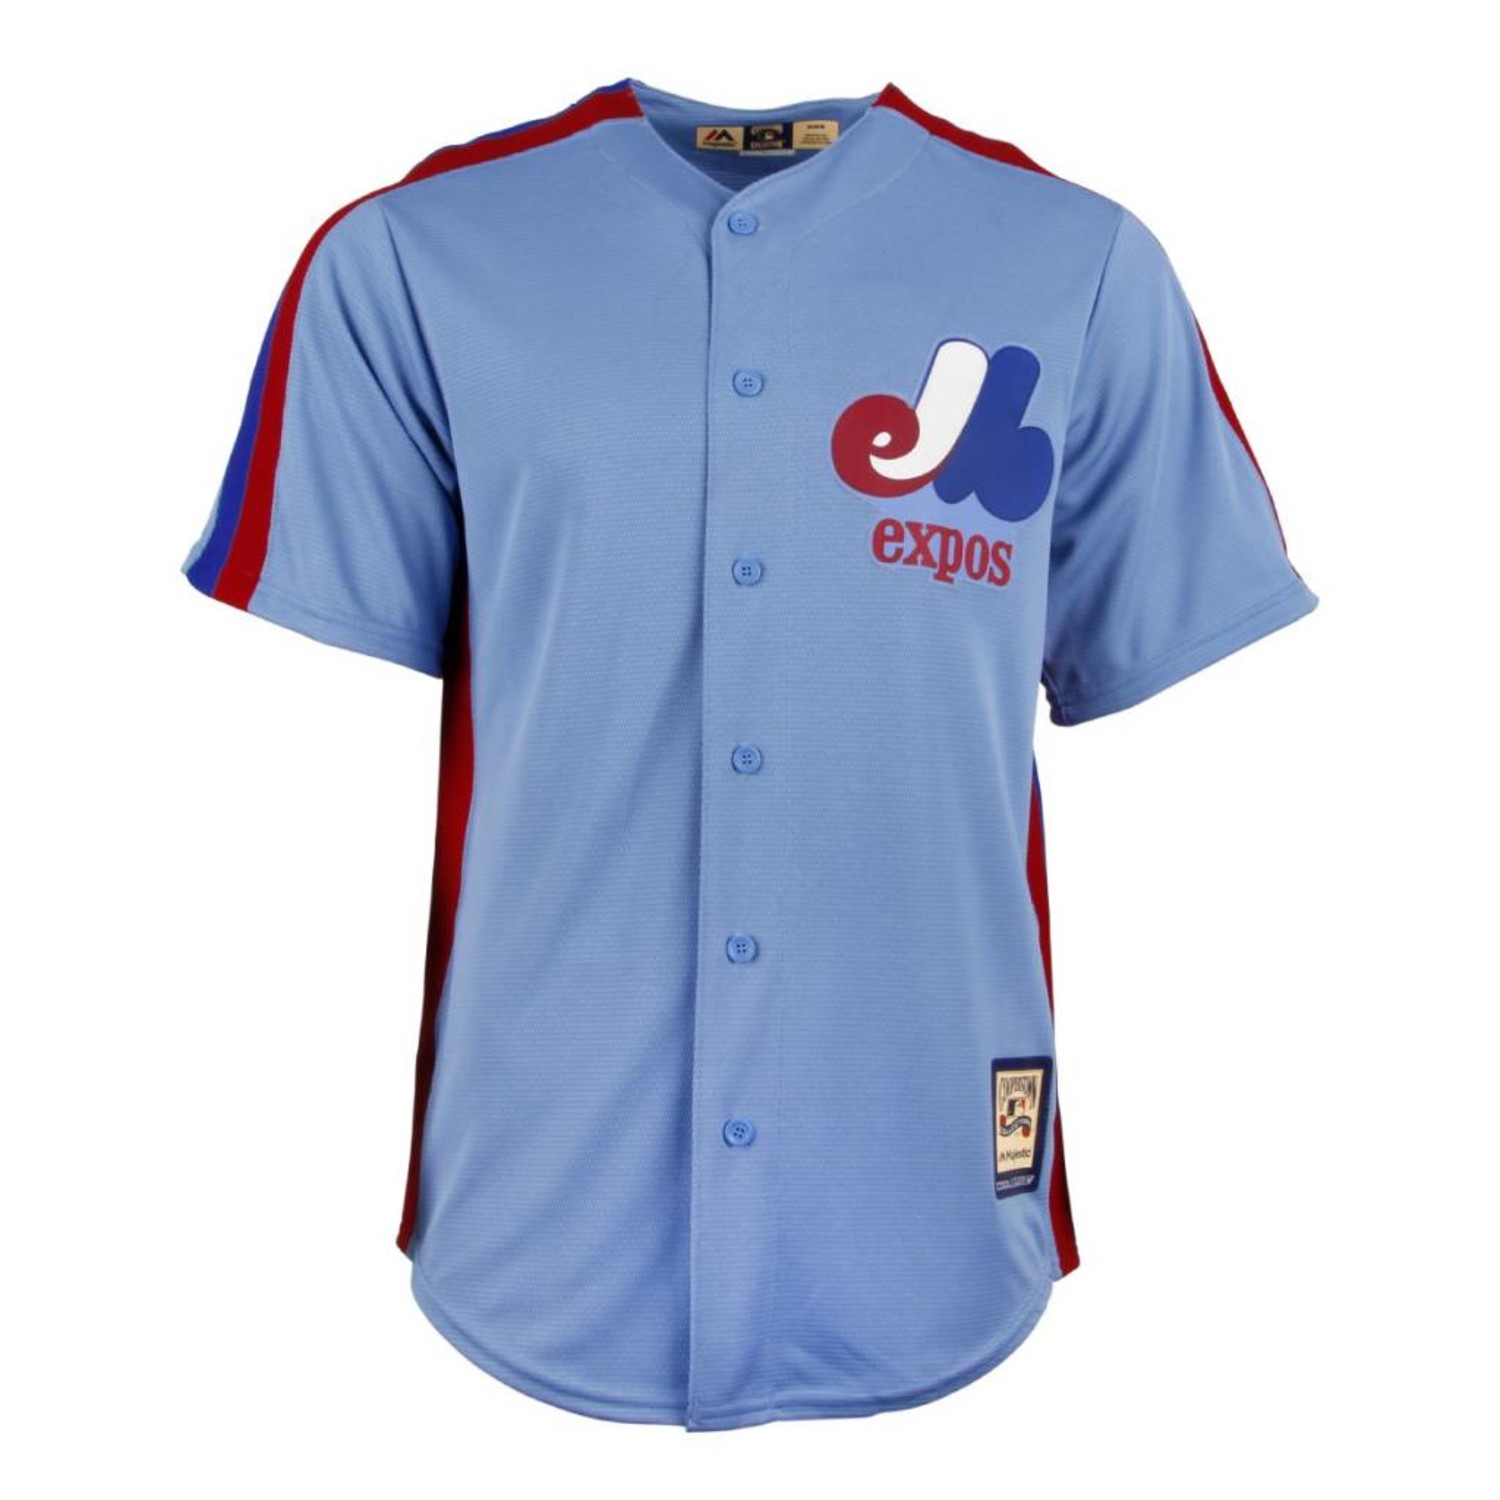 Expos Jersey∣ Tricolore Sports 